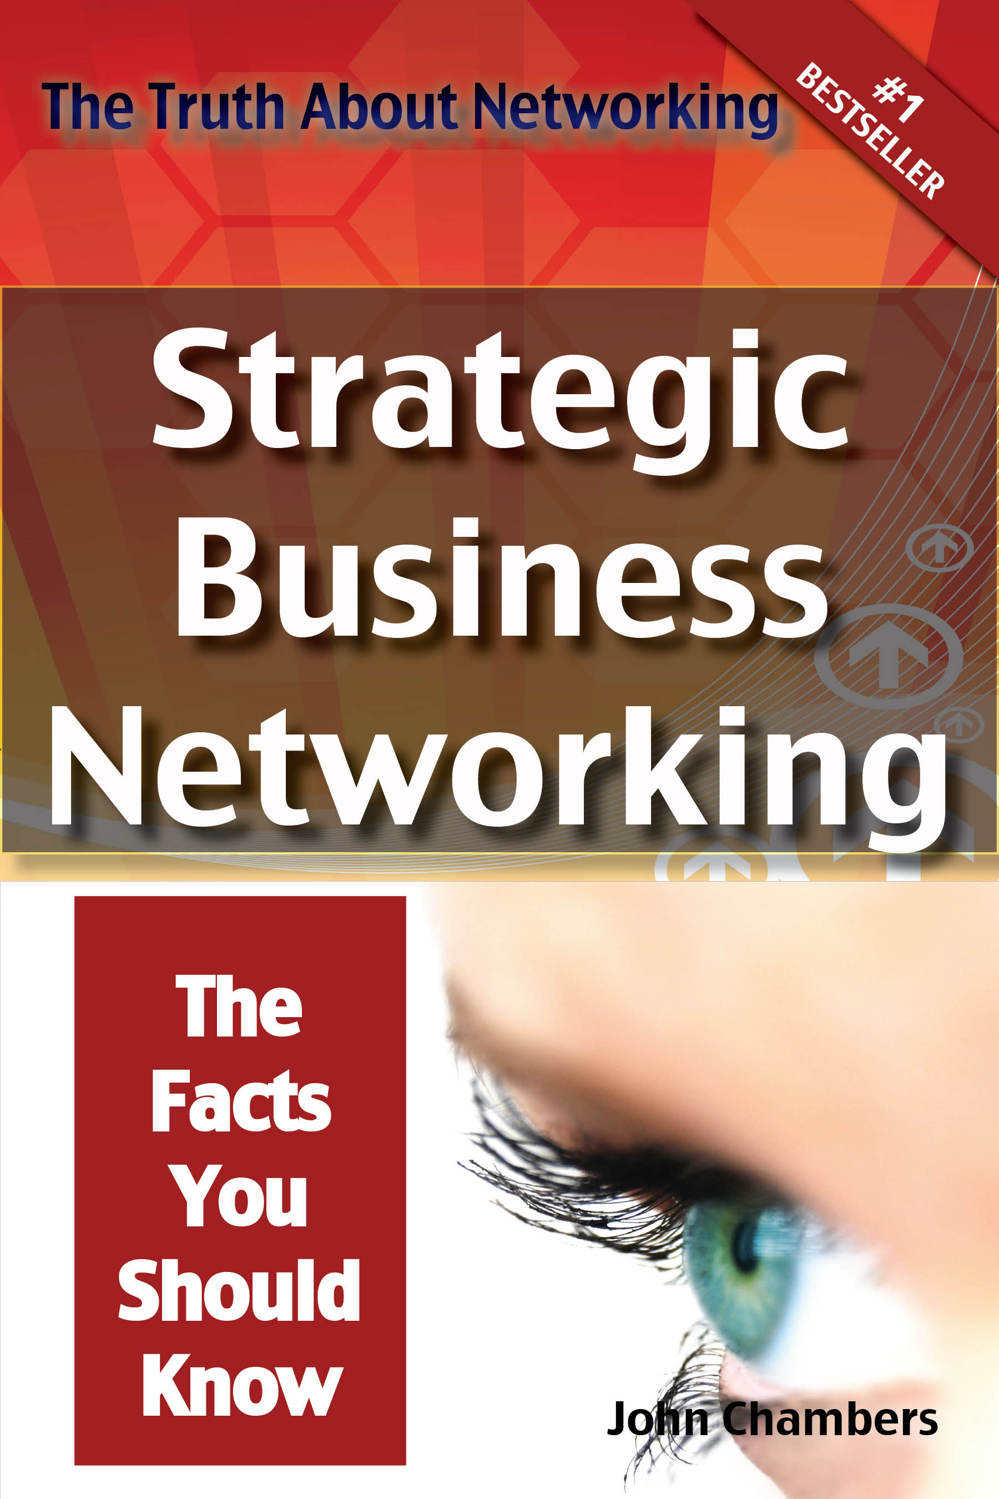 The Truth About Networking: Strategic Business Networking